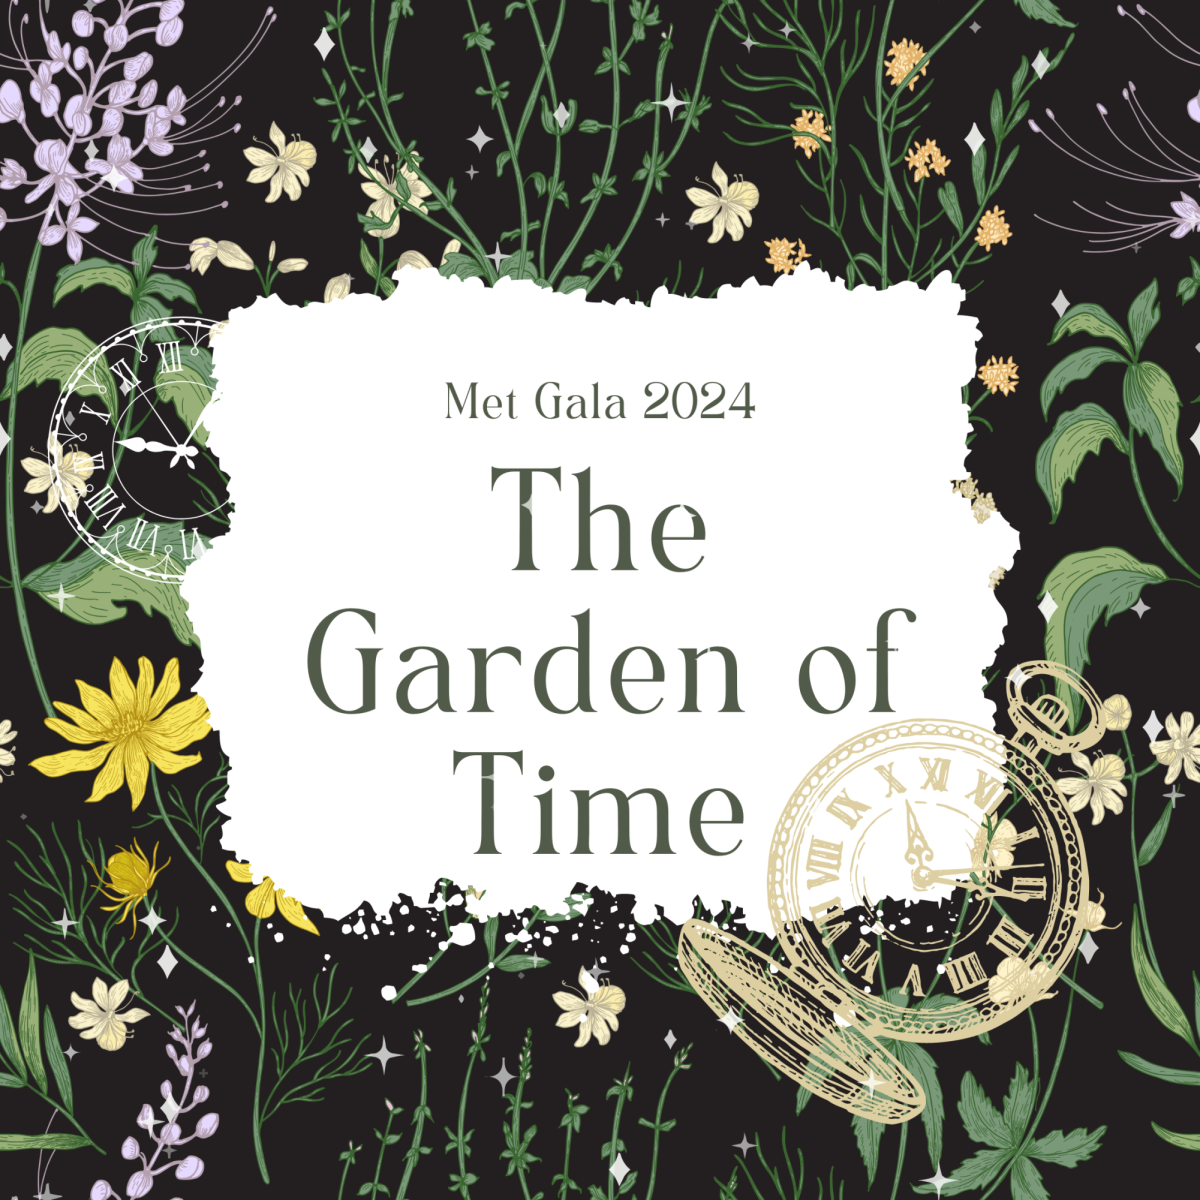 Canva graphic displaying the galas theme along with florals and time-related elements.